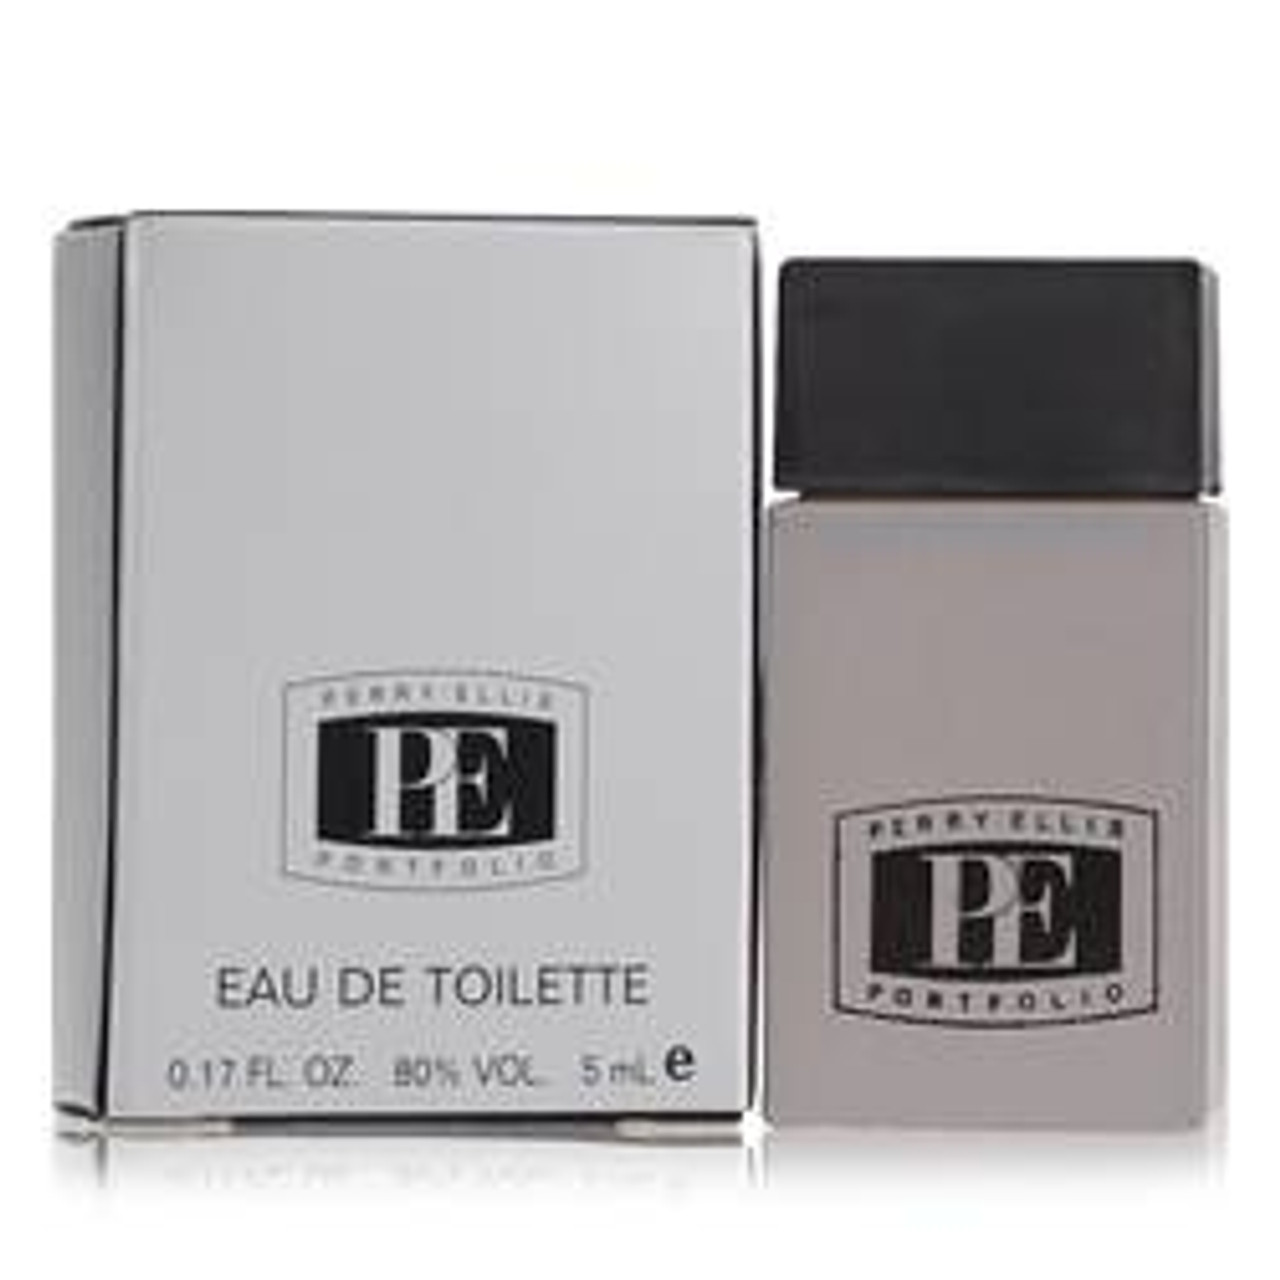 Portfolio Cologne By Perry Ellis Mini EDT 0.17 oz for Men - [From 19.00 - Choose pk Qty ] - *Ships from Miami